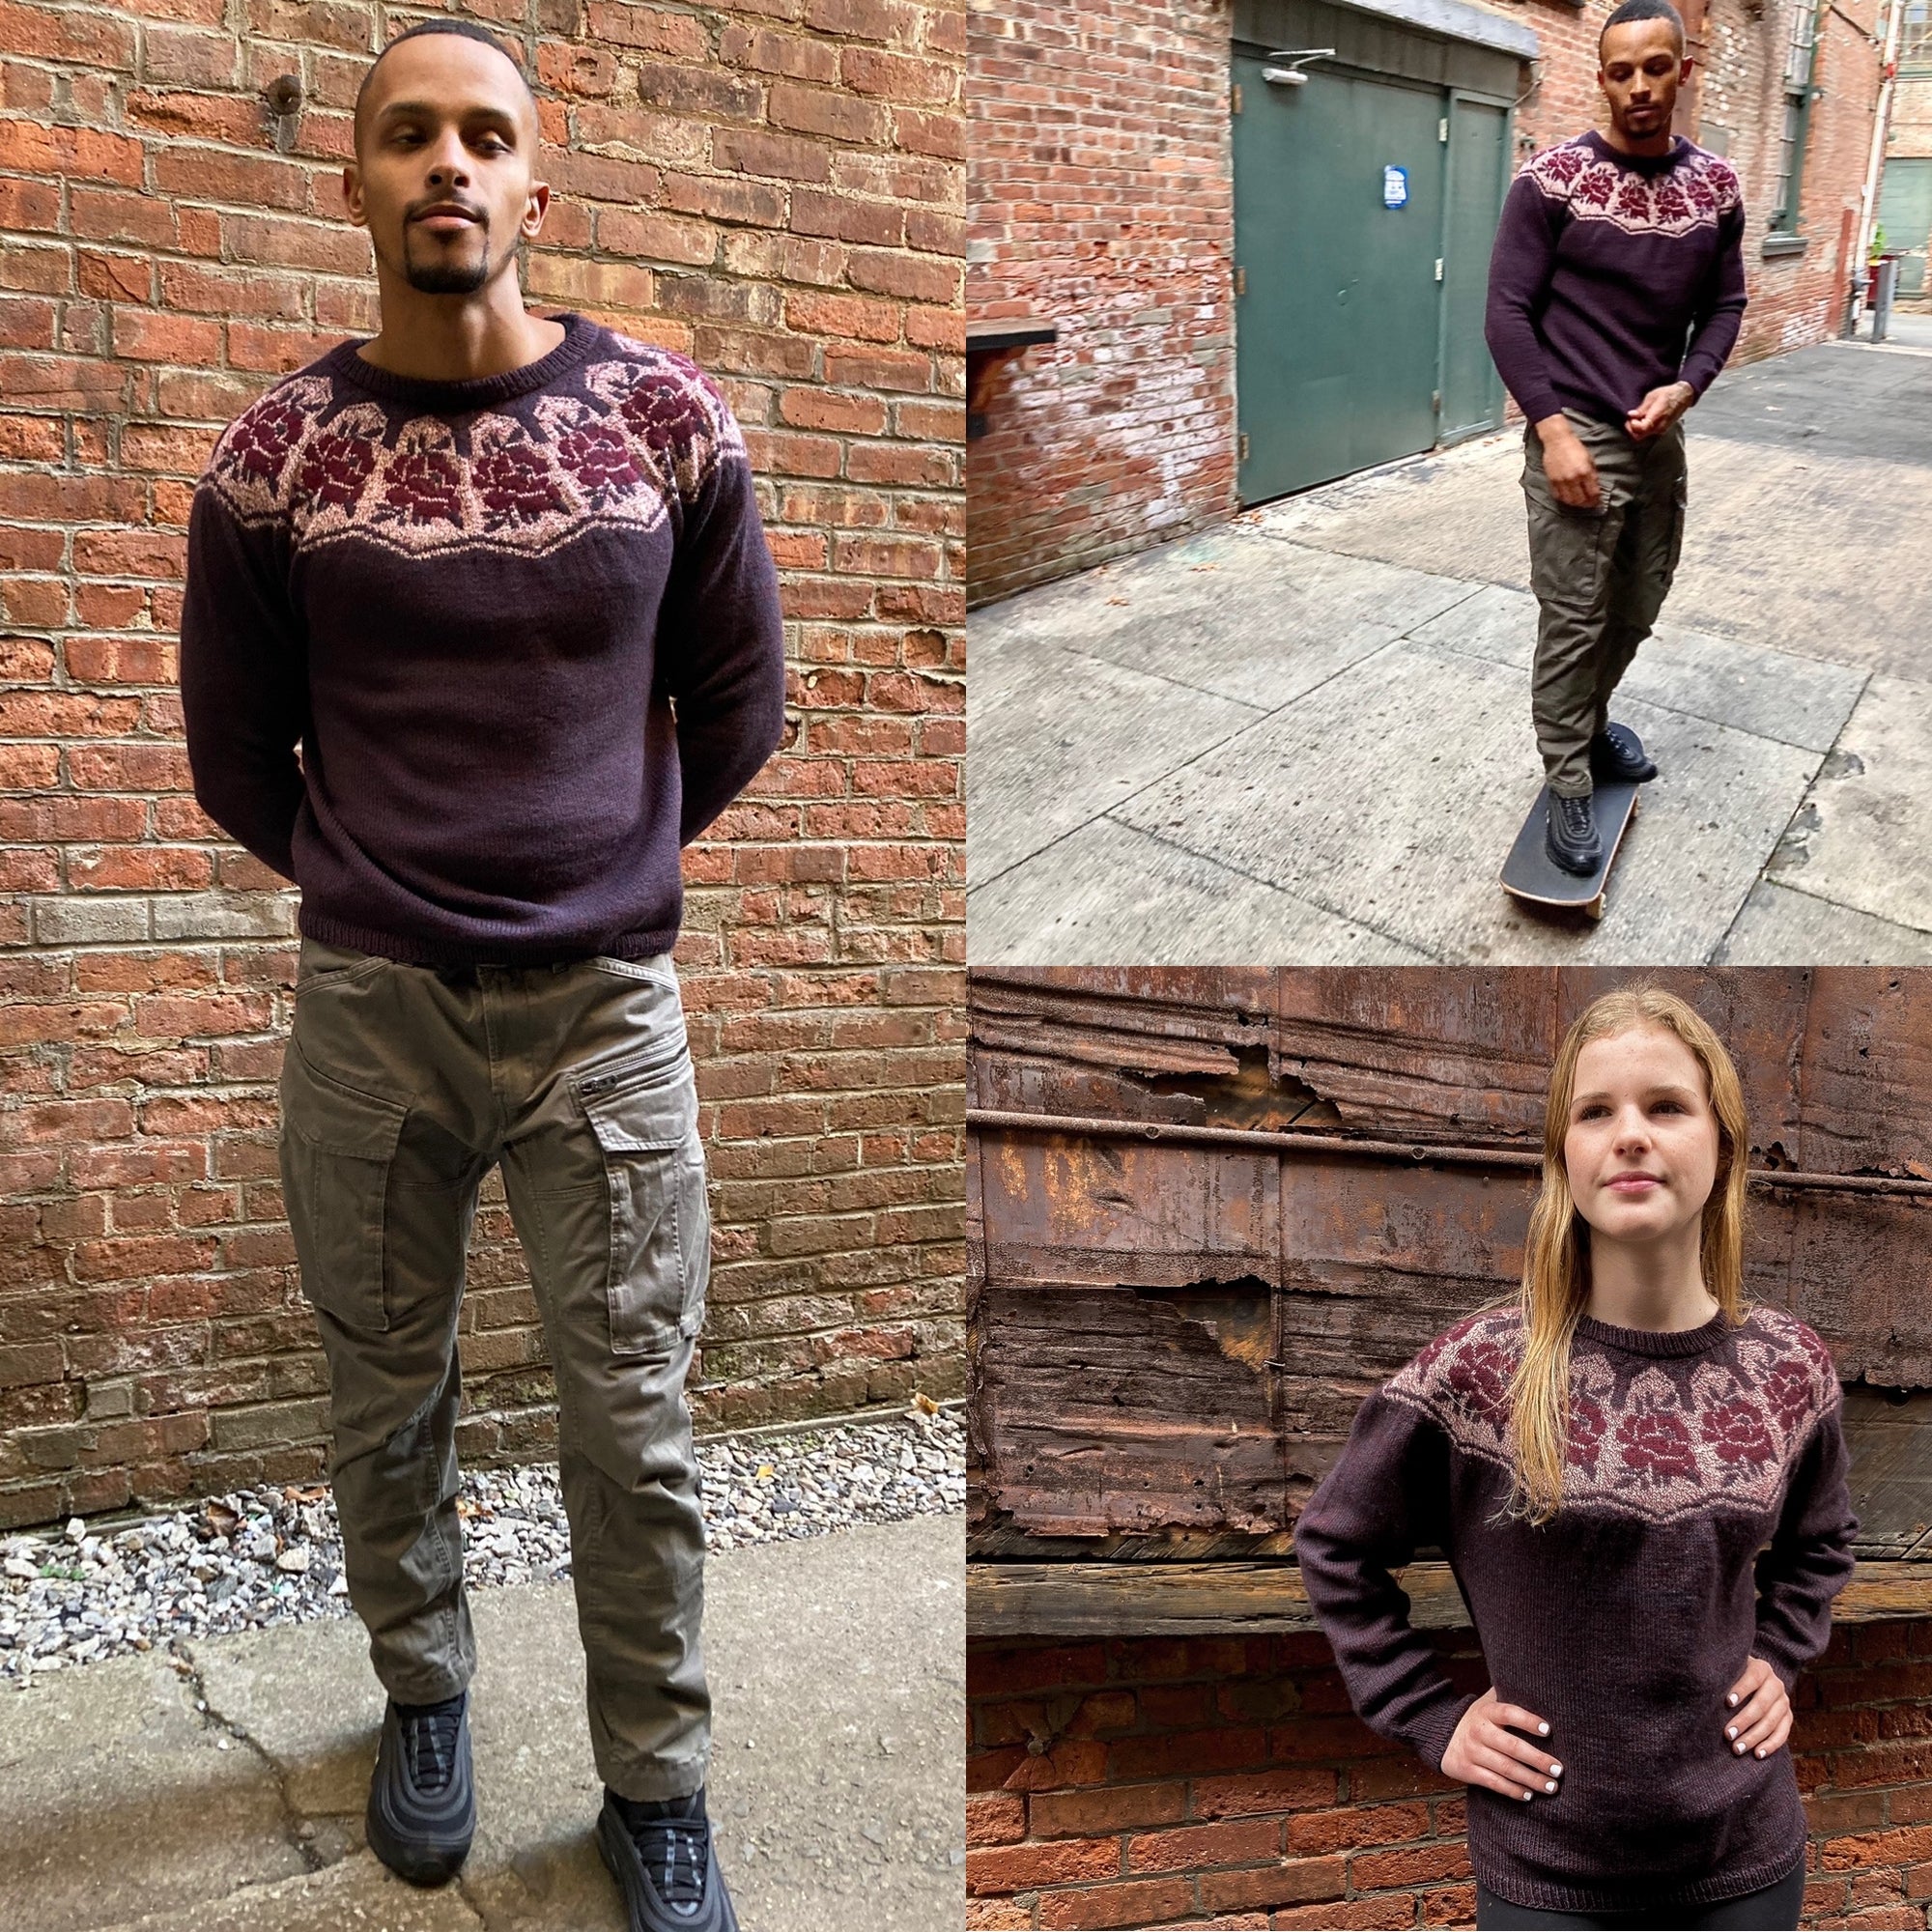 "WE LOVE a good unisex sweater pattern and marled yarn is wonderfully gender-neutral."